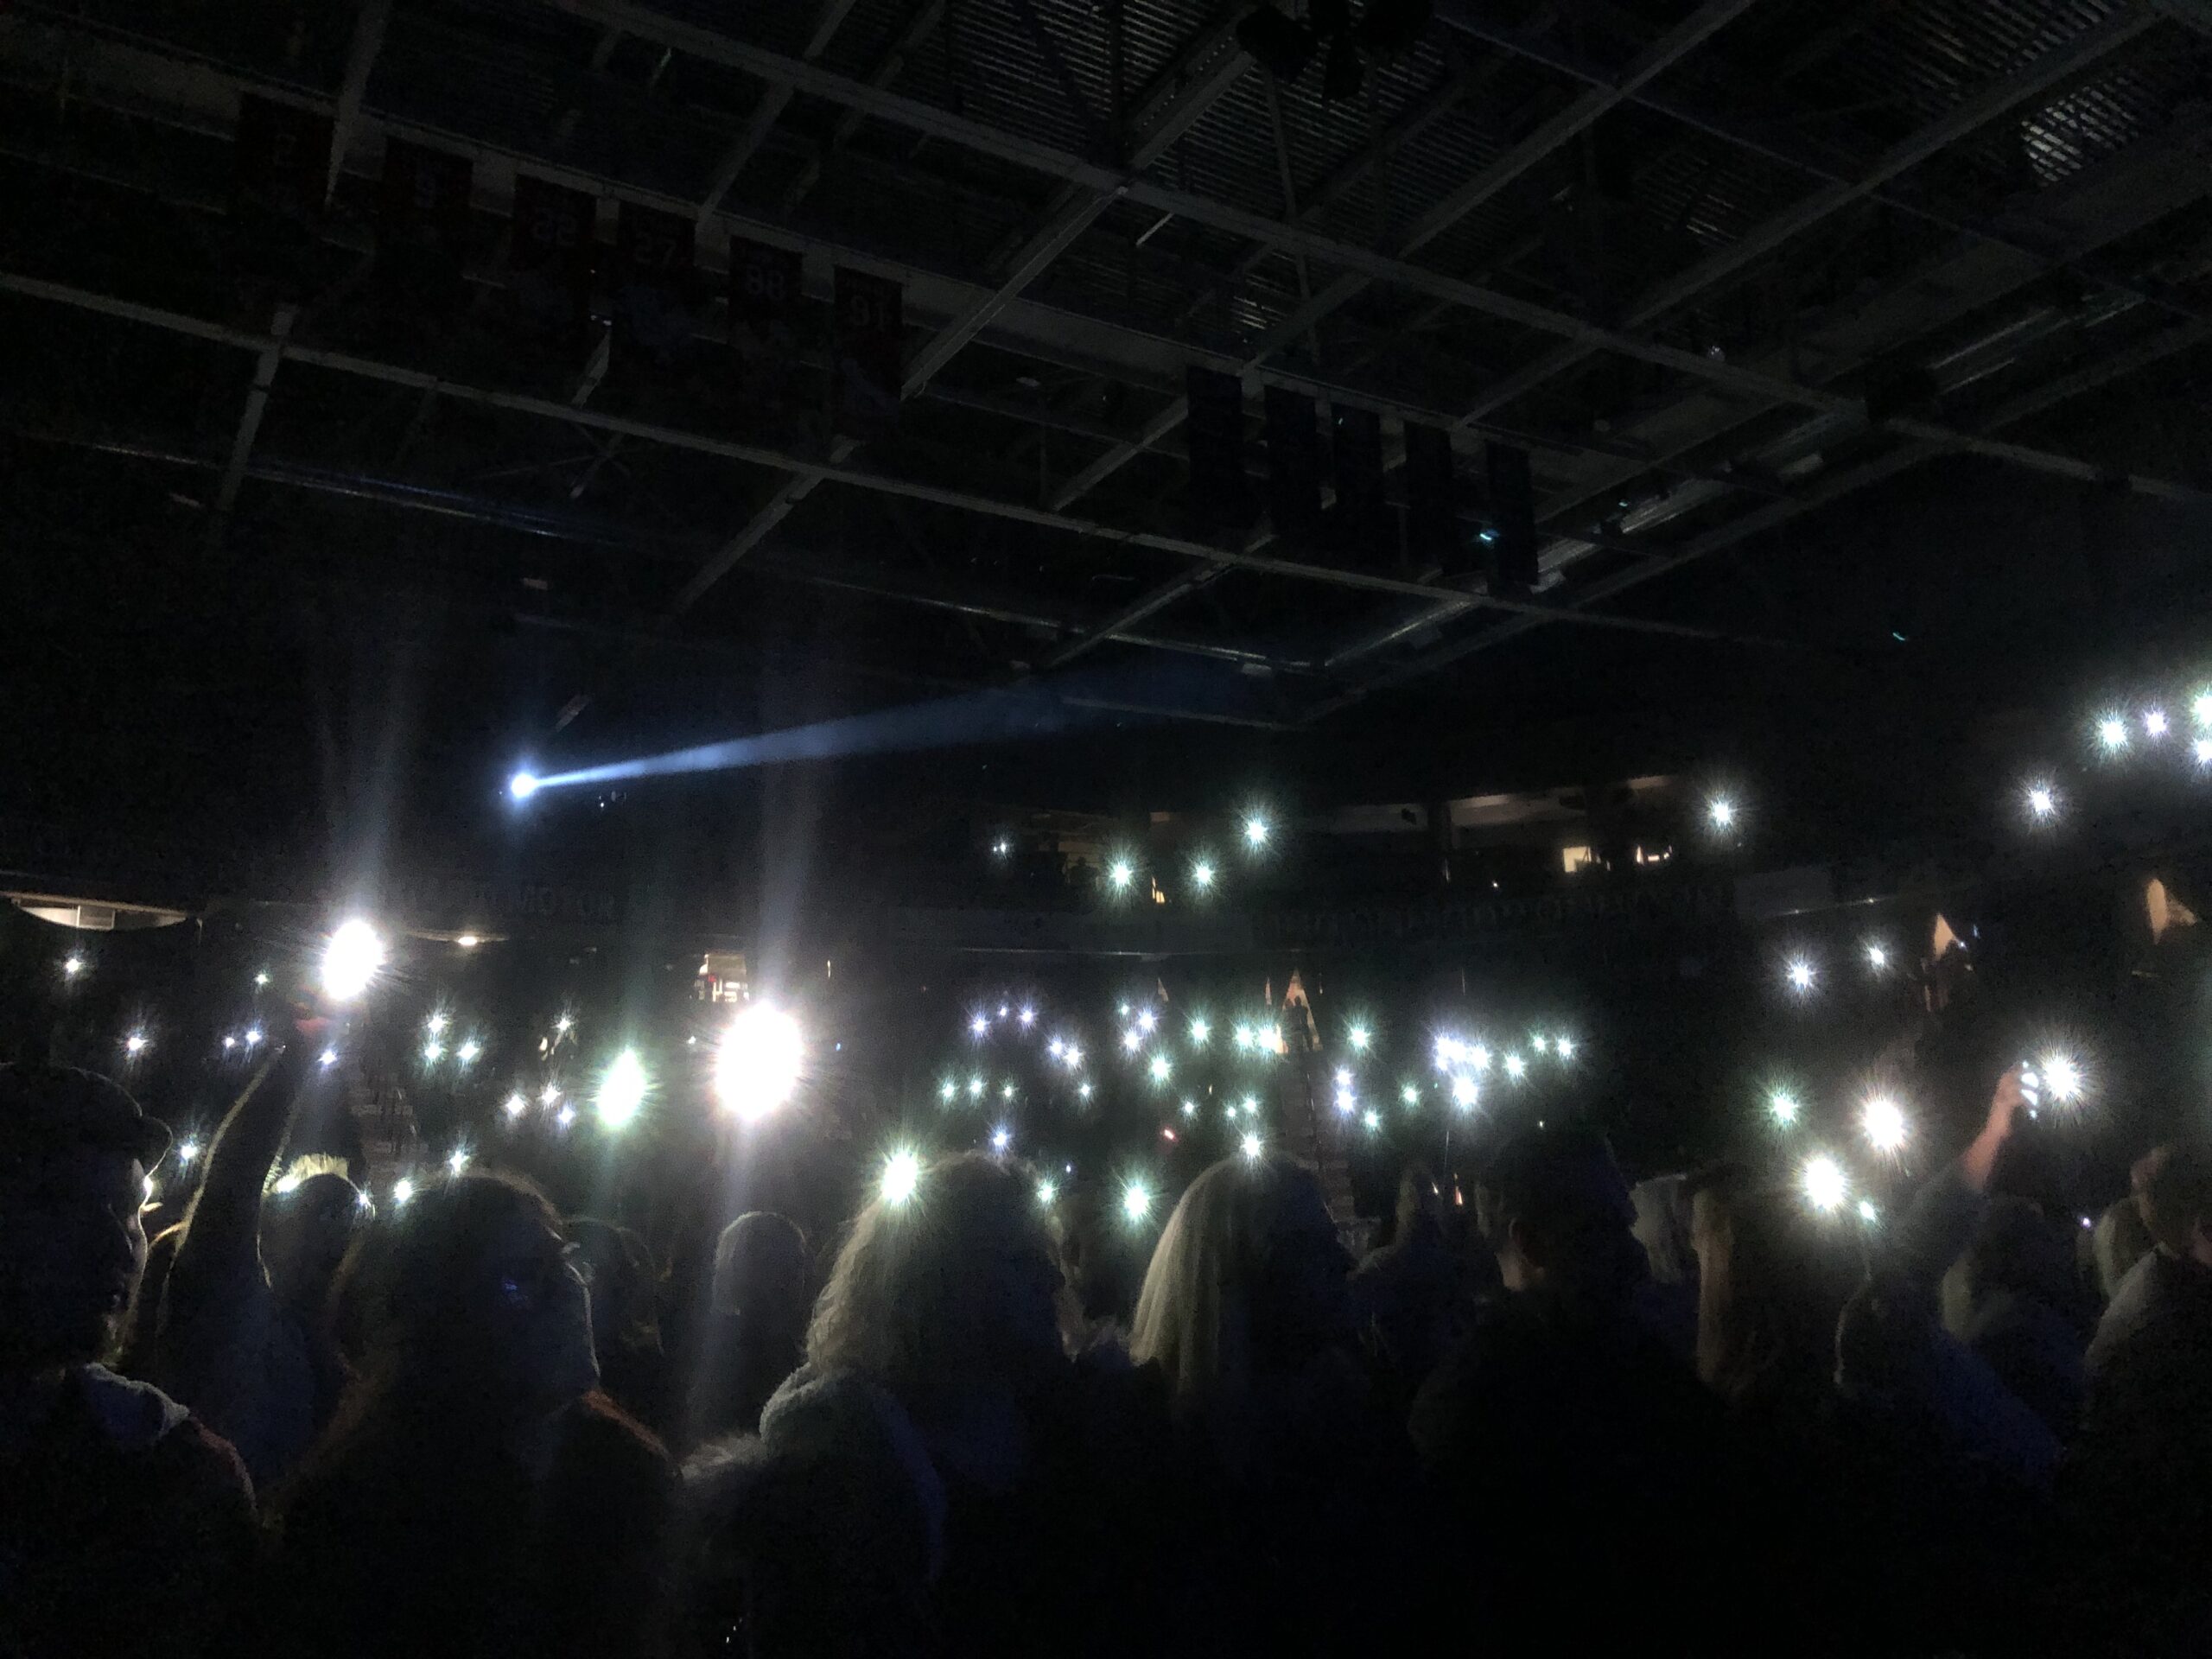 The darkened interior of the TCC during a performance by the musical rock experience We Will Rock You, a tribute musical to the band Queen. The audience have their phone flashlights on, swaying to the music.